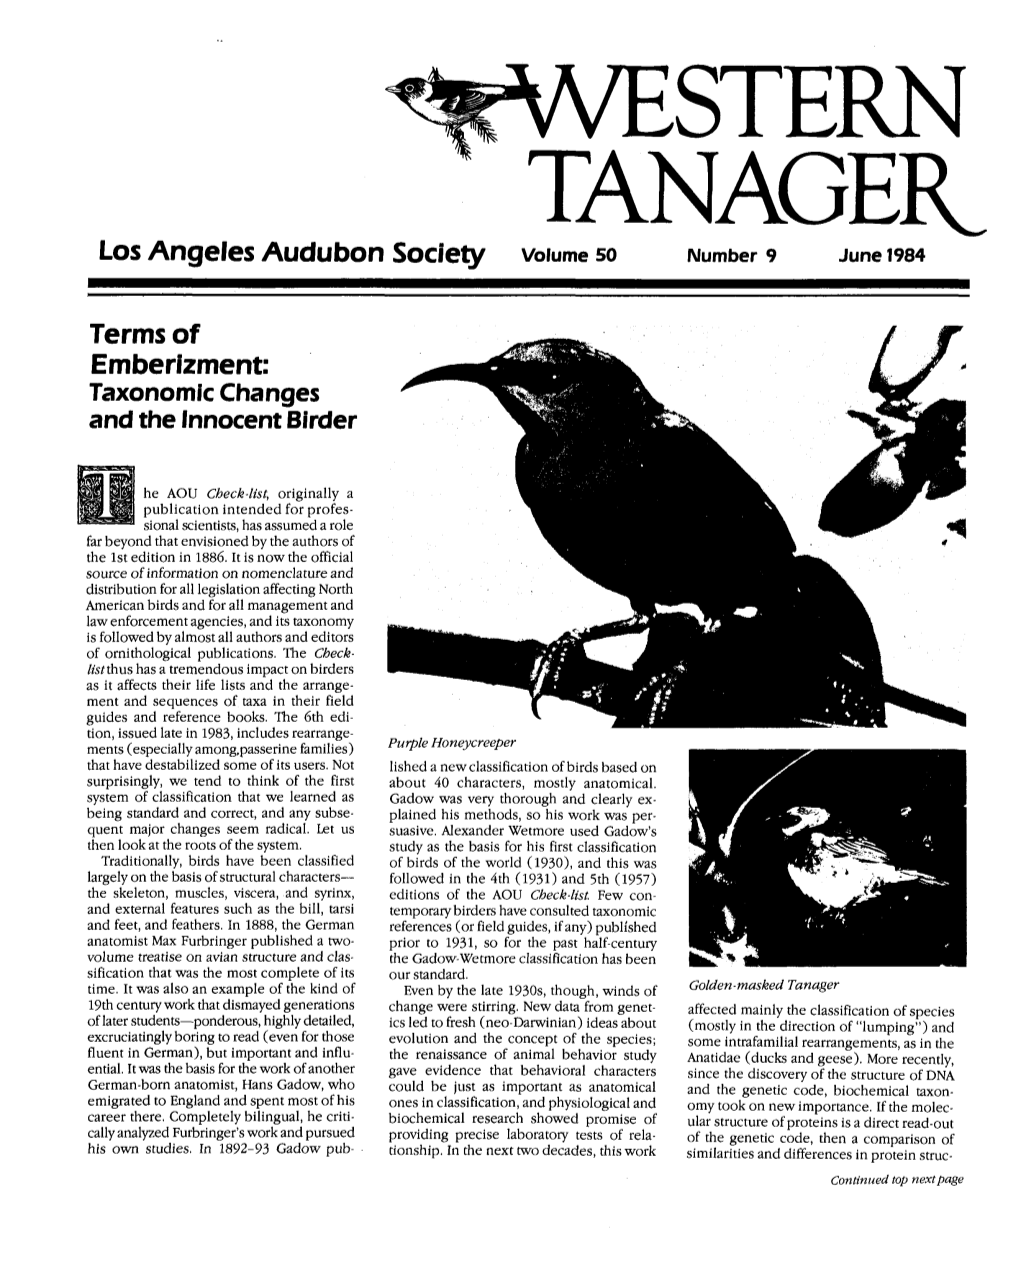 Terms of Emberizment: Taxonomic Changes and the Innocent Birder